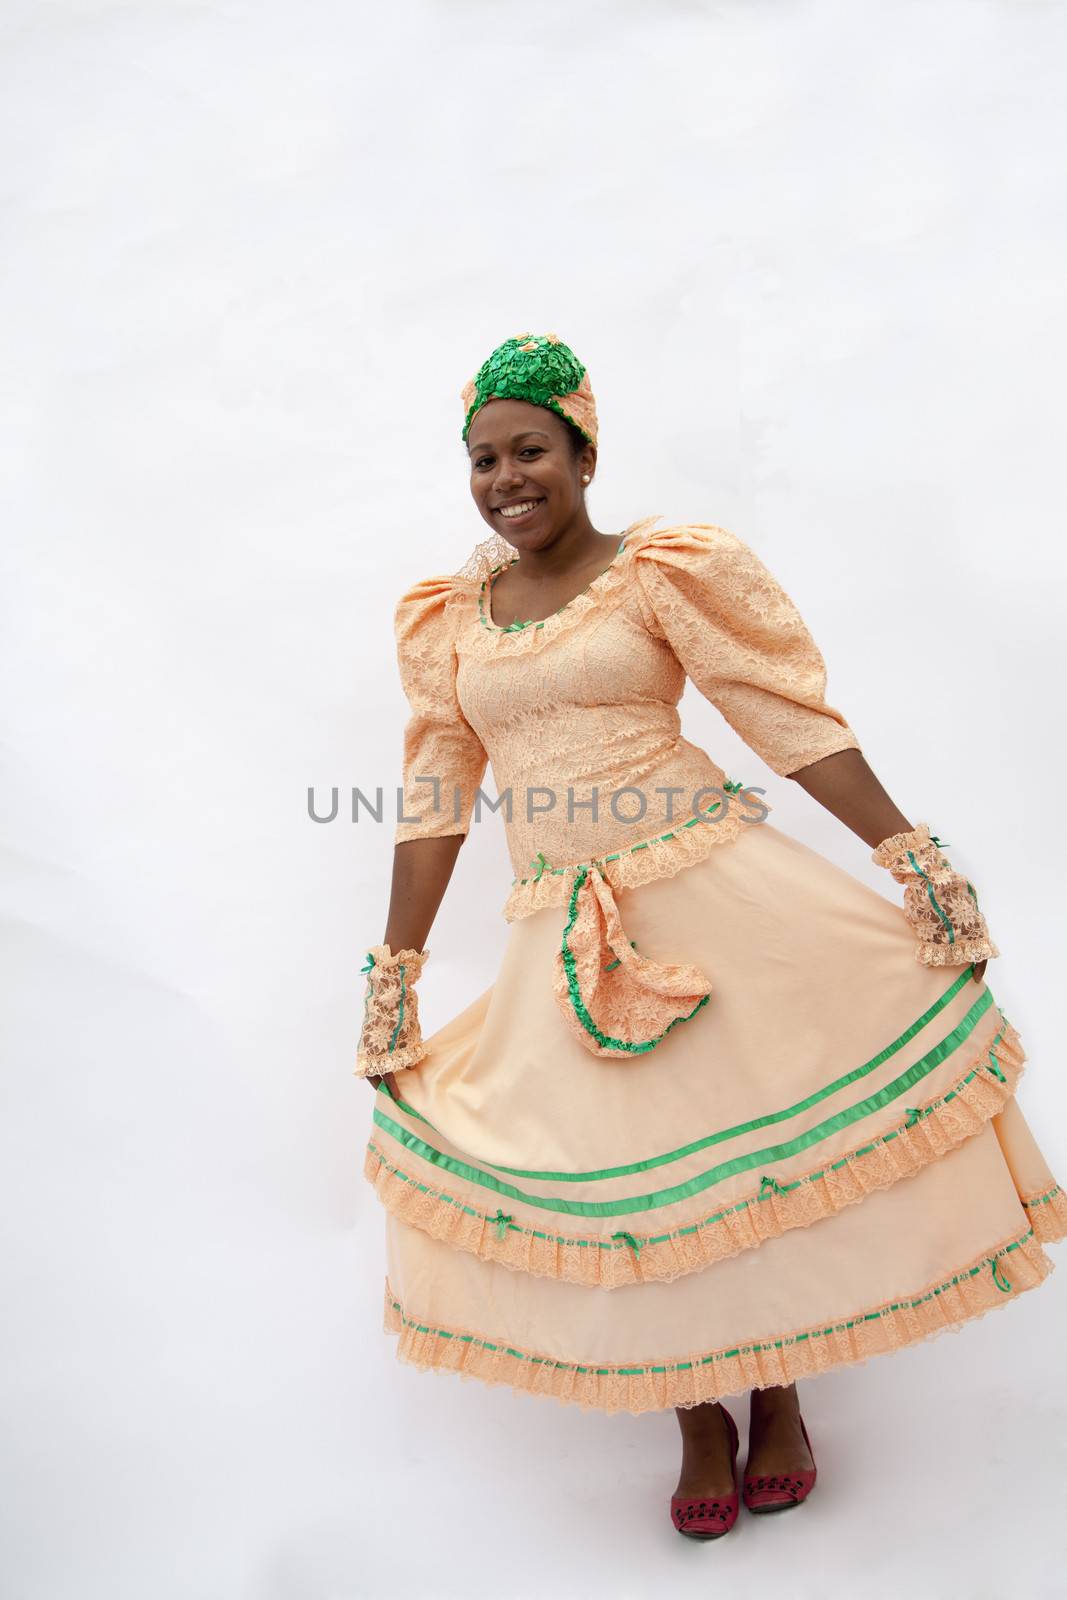 Portrait of young smiling woman holding her skirt in traditional clothing from the Caribbean, studio shot by XiXinXing